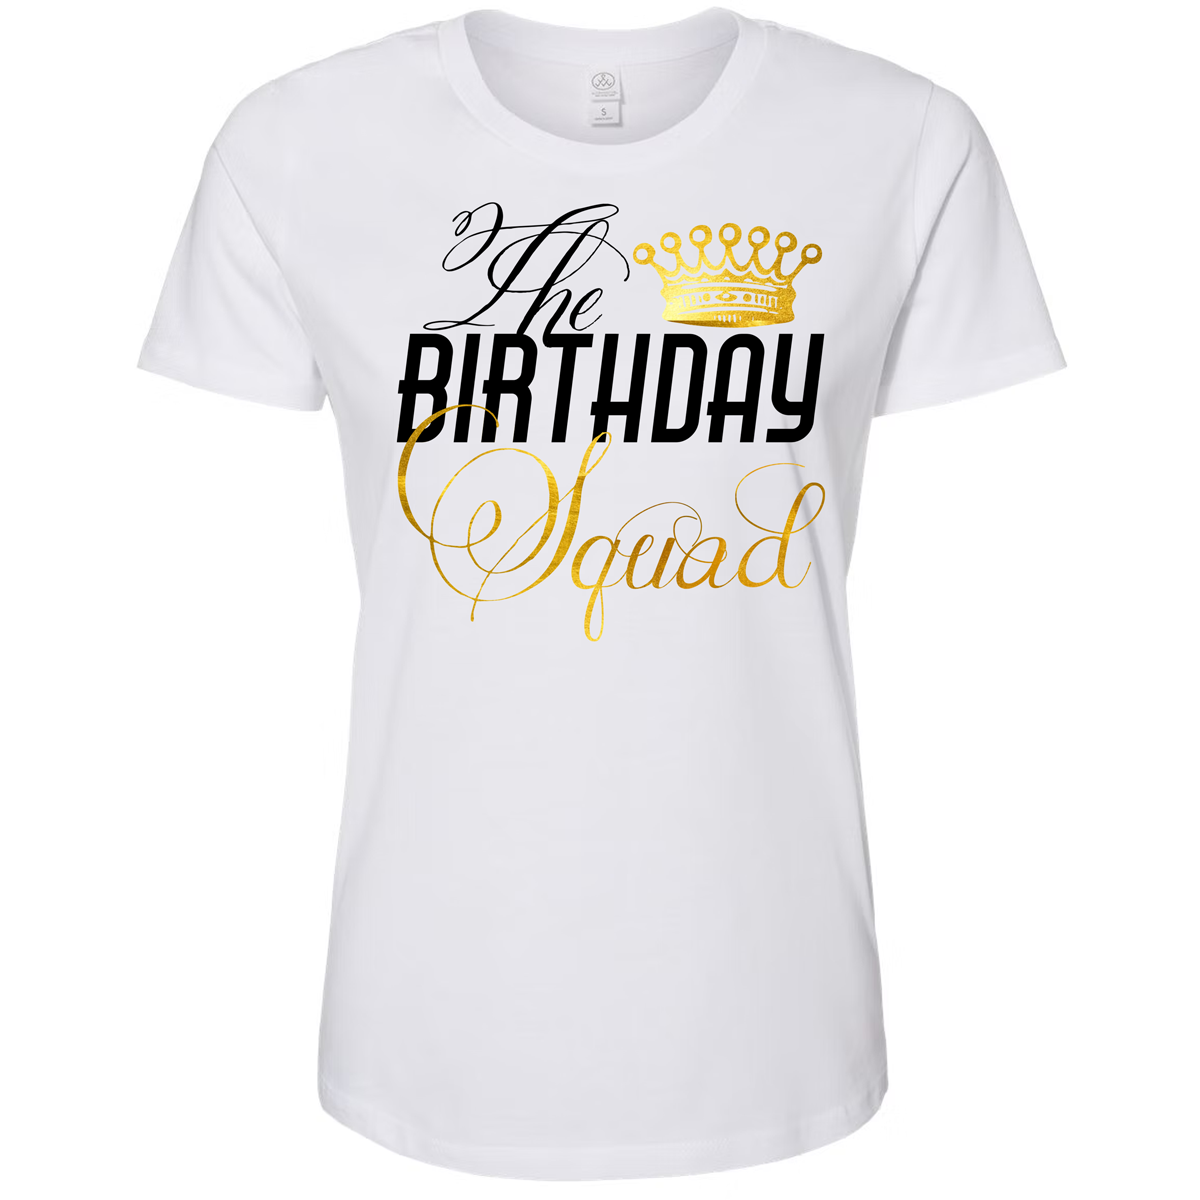 The Birthday Queen - Her King Couples and Birthday Squad Shirts - Wilson Design Group